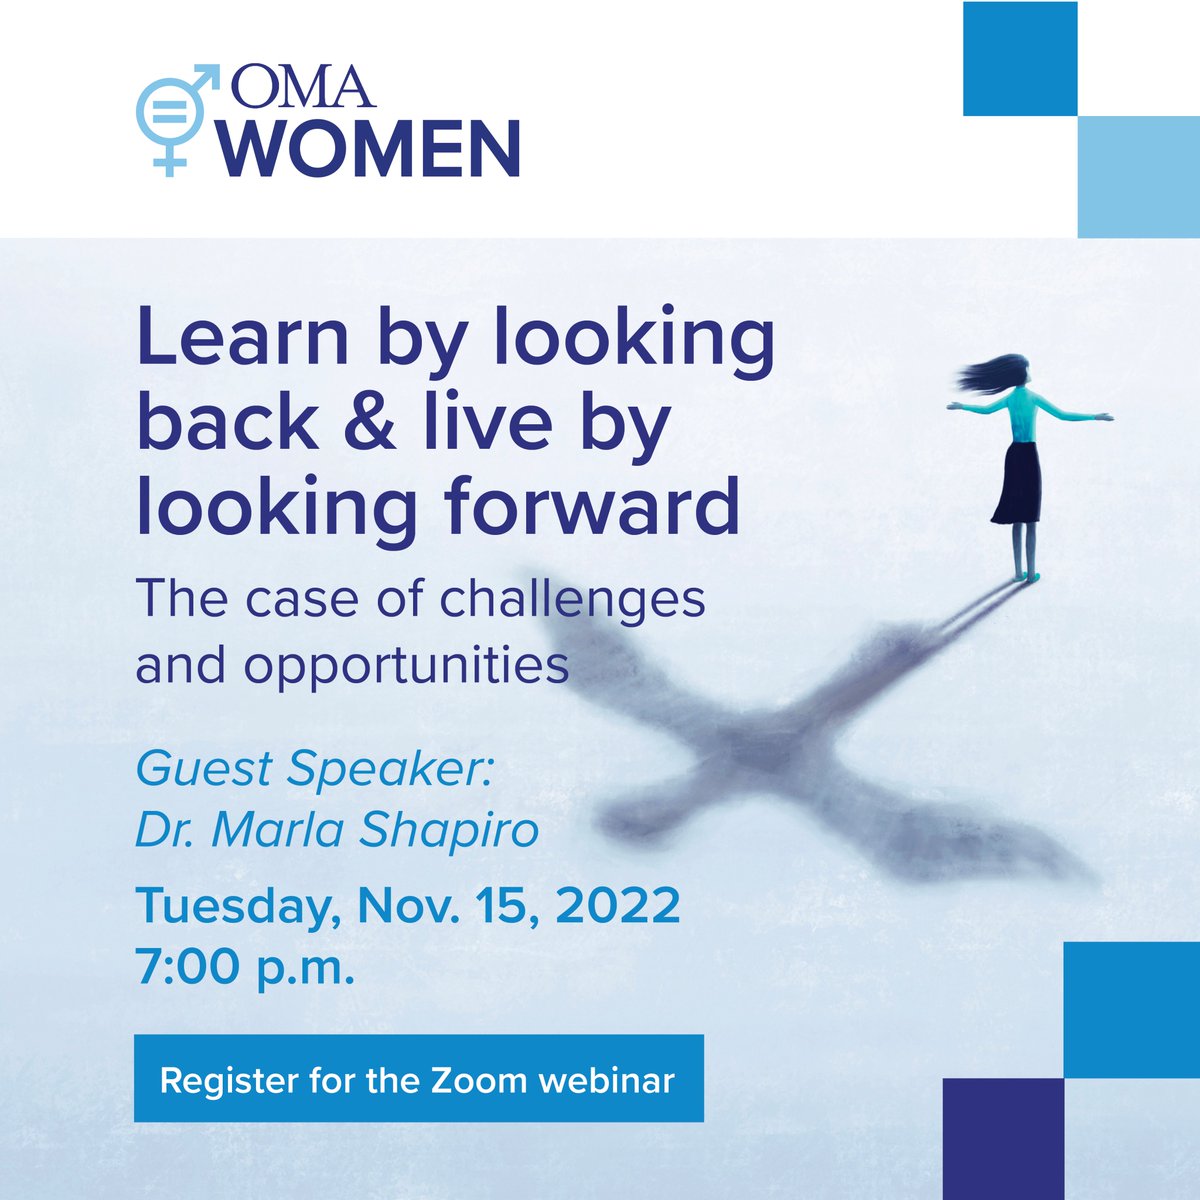 Join OMA Women for the upcoming virtual event 'Learn by looking back & live by looking forward,' featuring guest speaker @DrMarla ! Register here: ow.ly/2nUj50LowWw #Onhealth